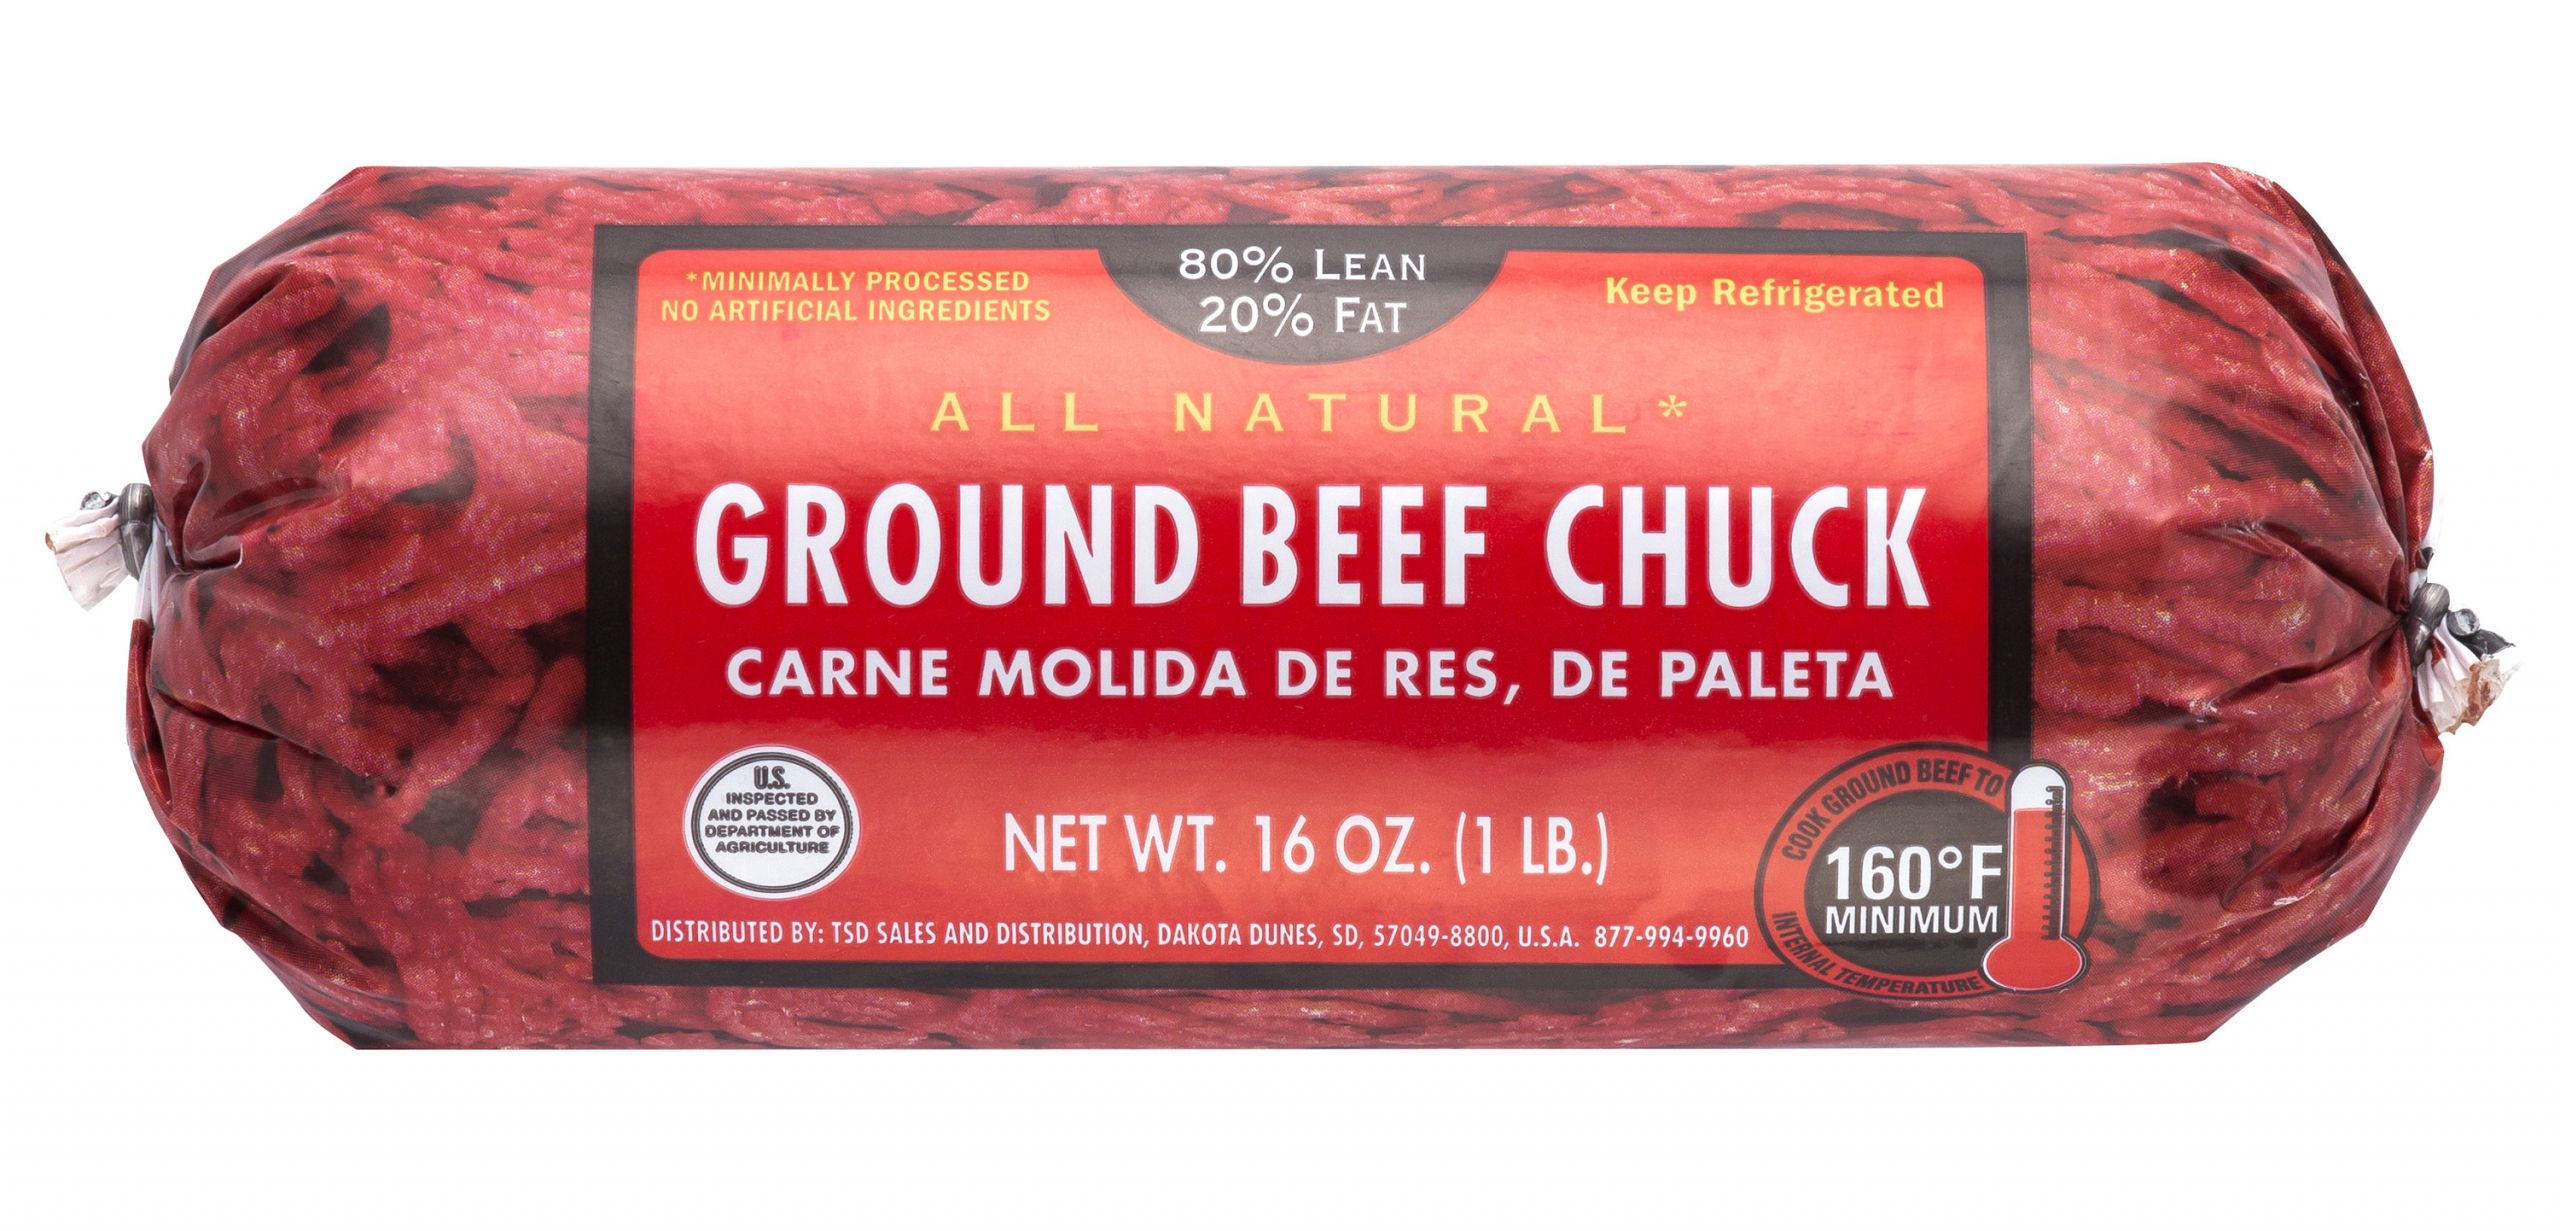 Ground Beef Walmart
 All Natural Lean Fat Ground Beef Chuck Roll 1 lb